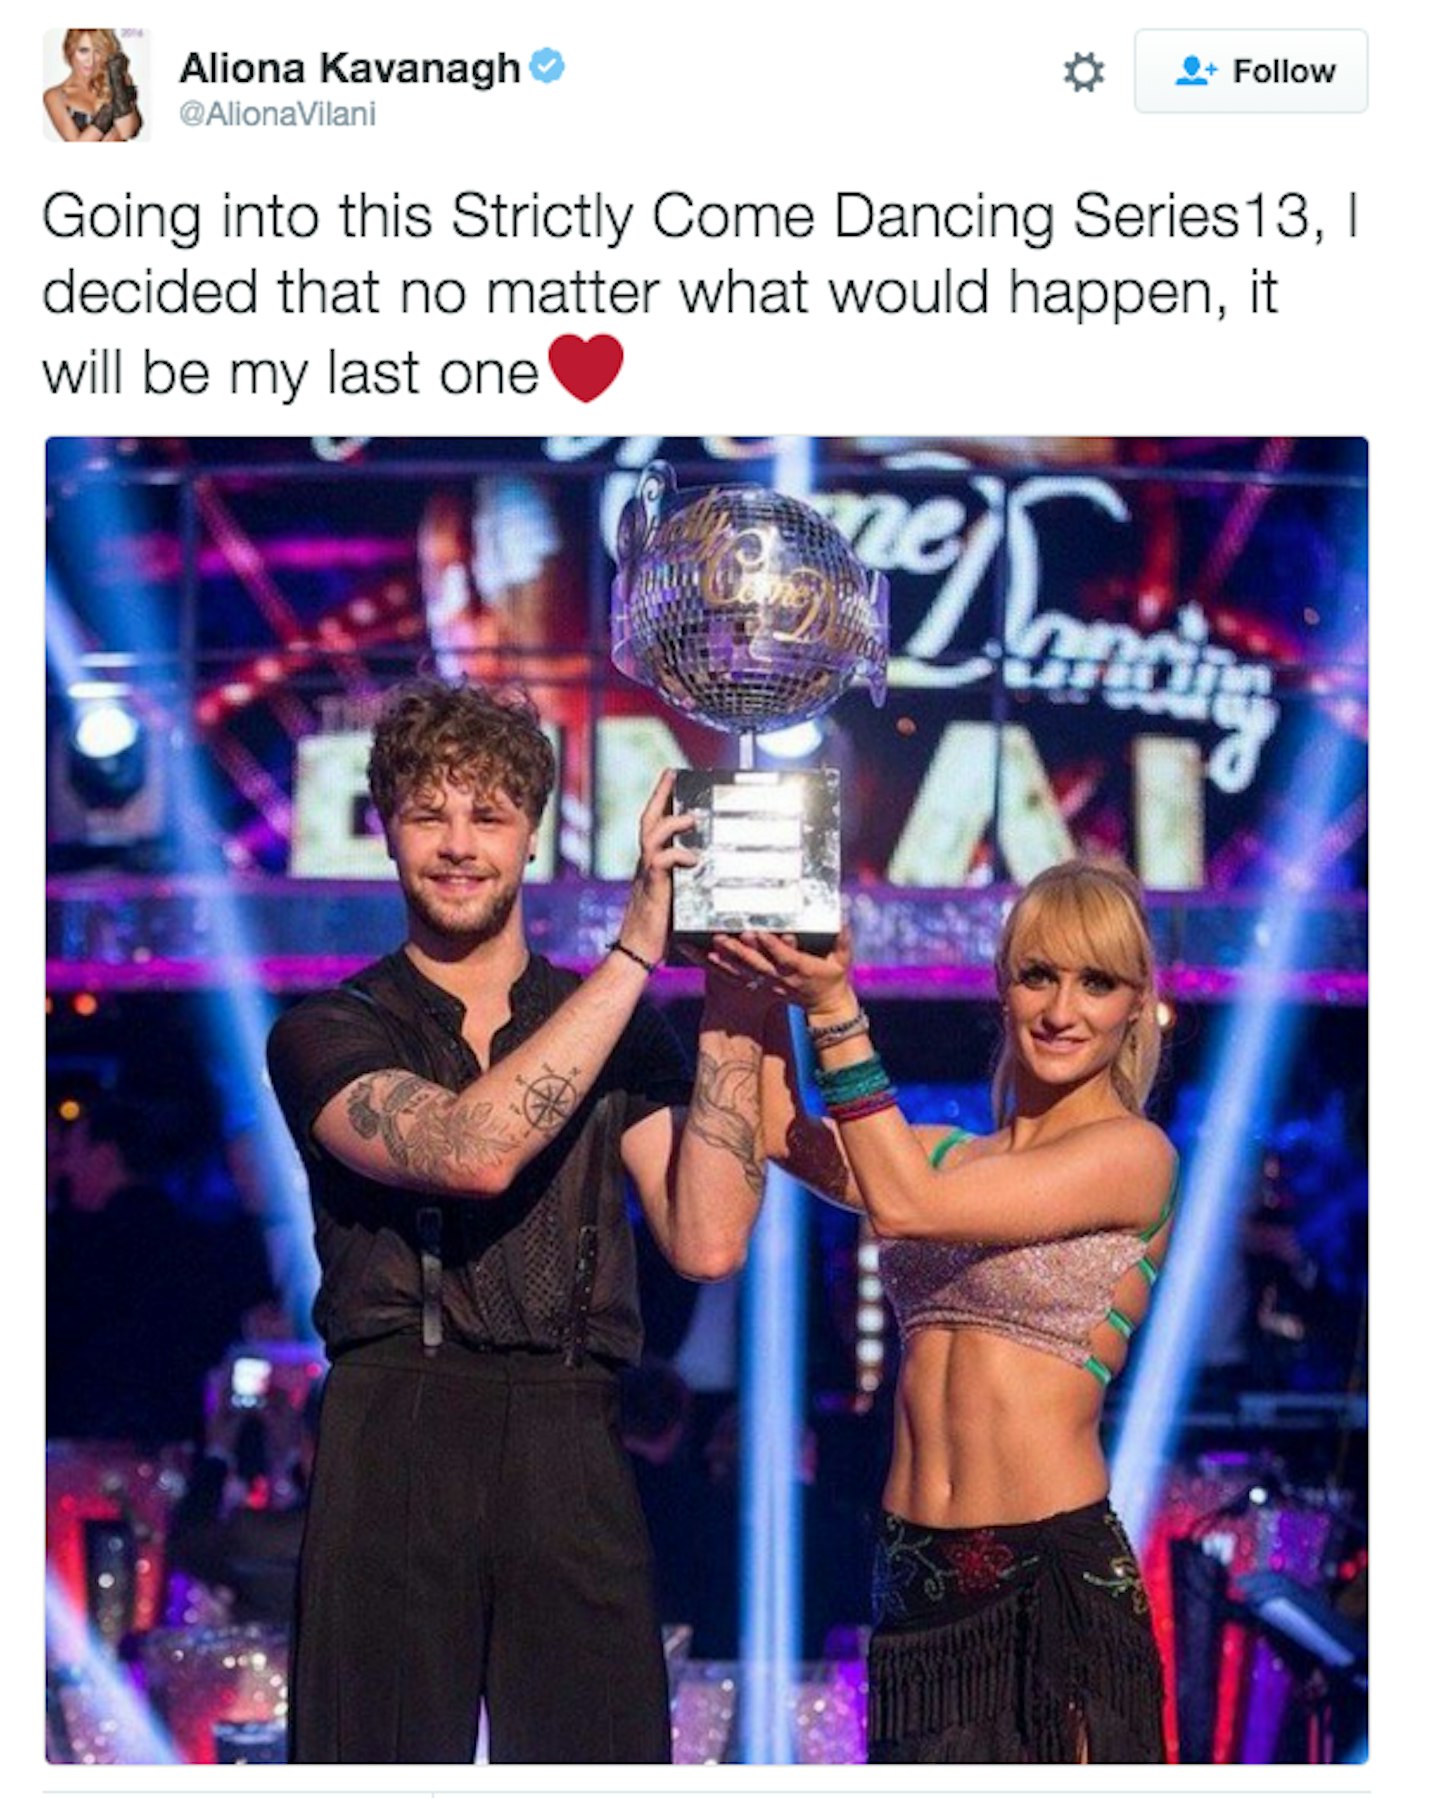 Aliona Kavanagh quit Strictly